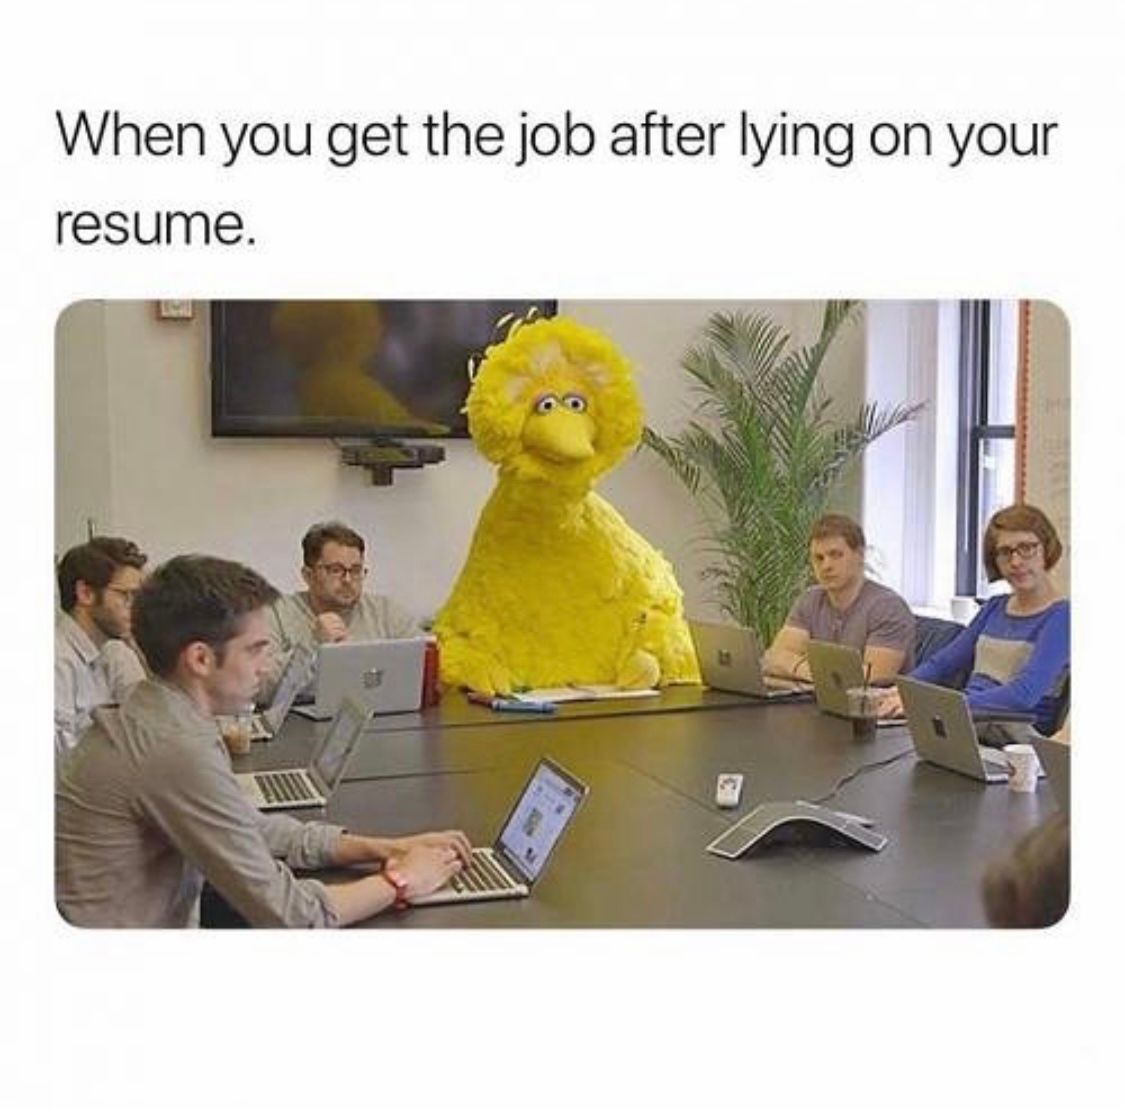 When You Get The Job After Lying On Your Resume